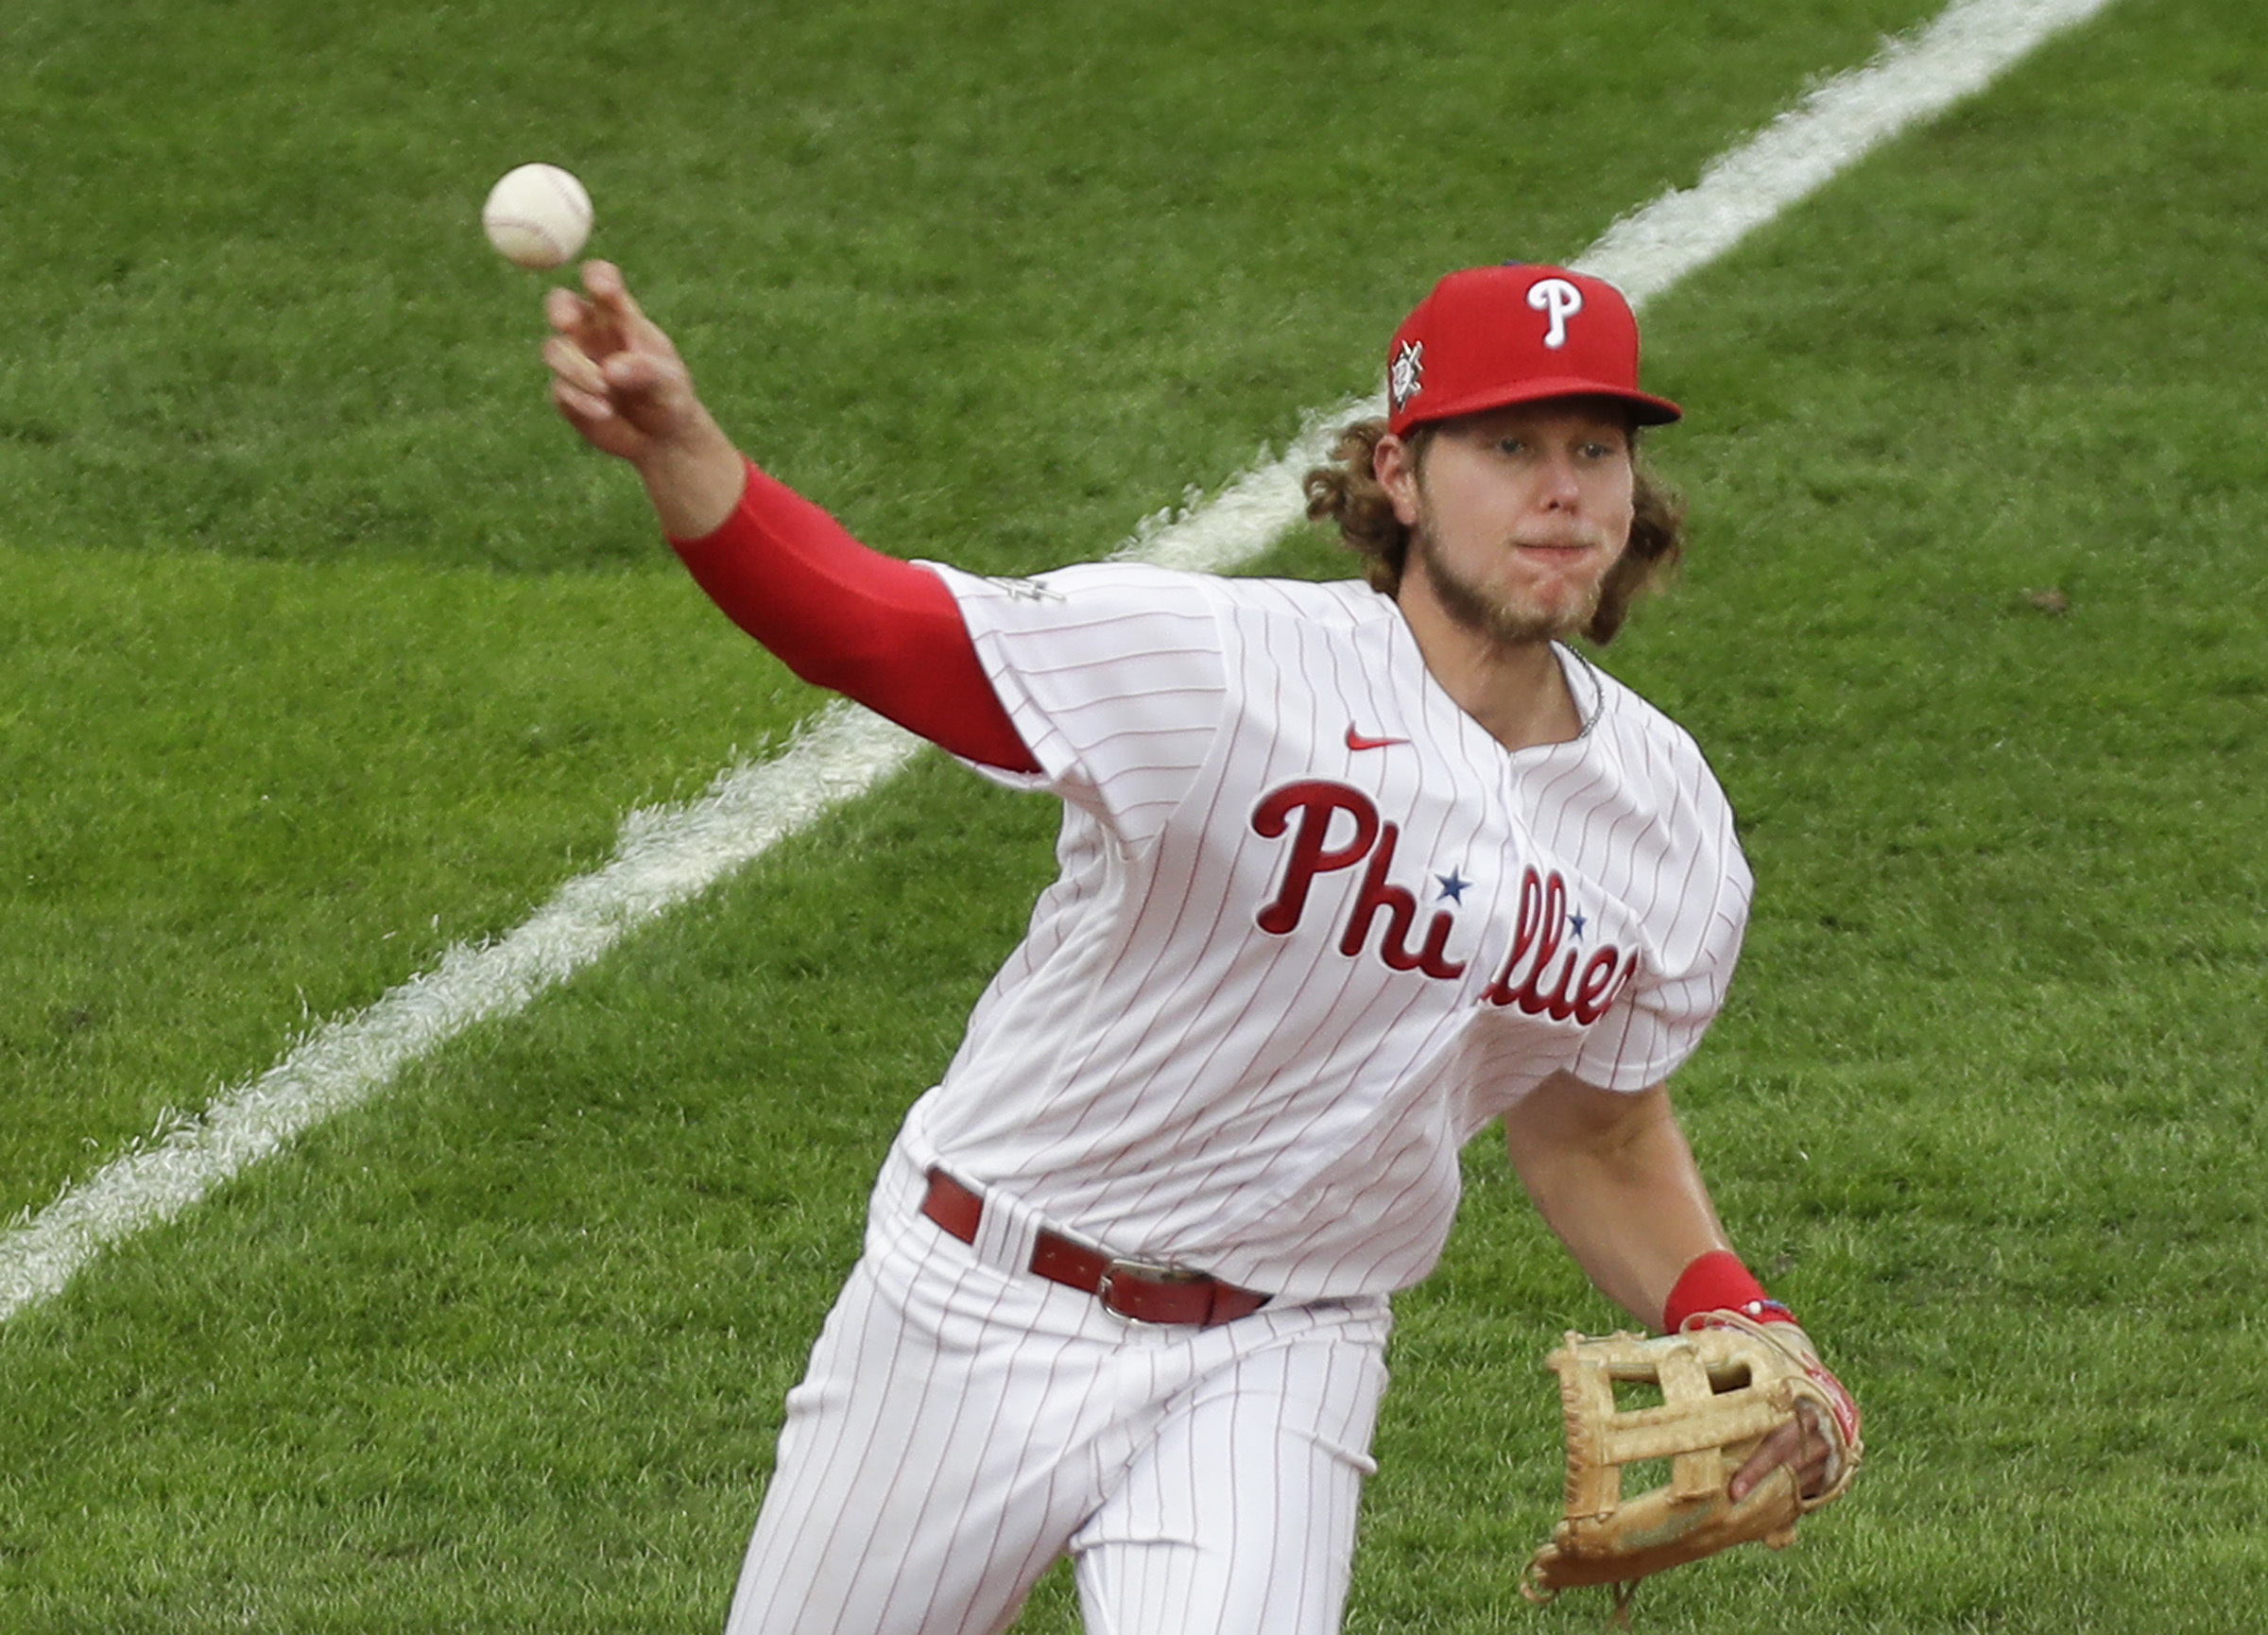 Phillies rookie Alec Bohm has already developed knack for clutch